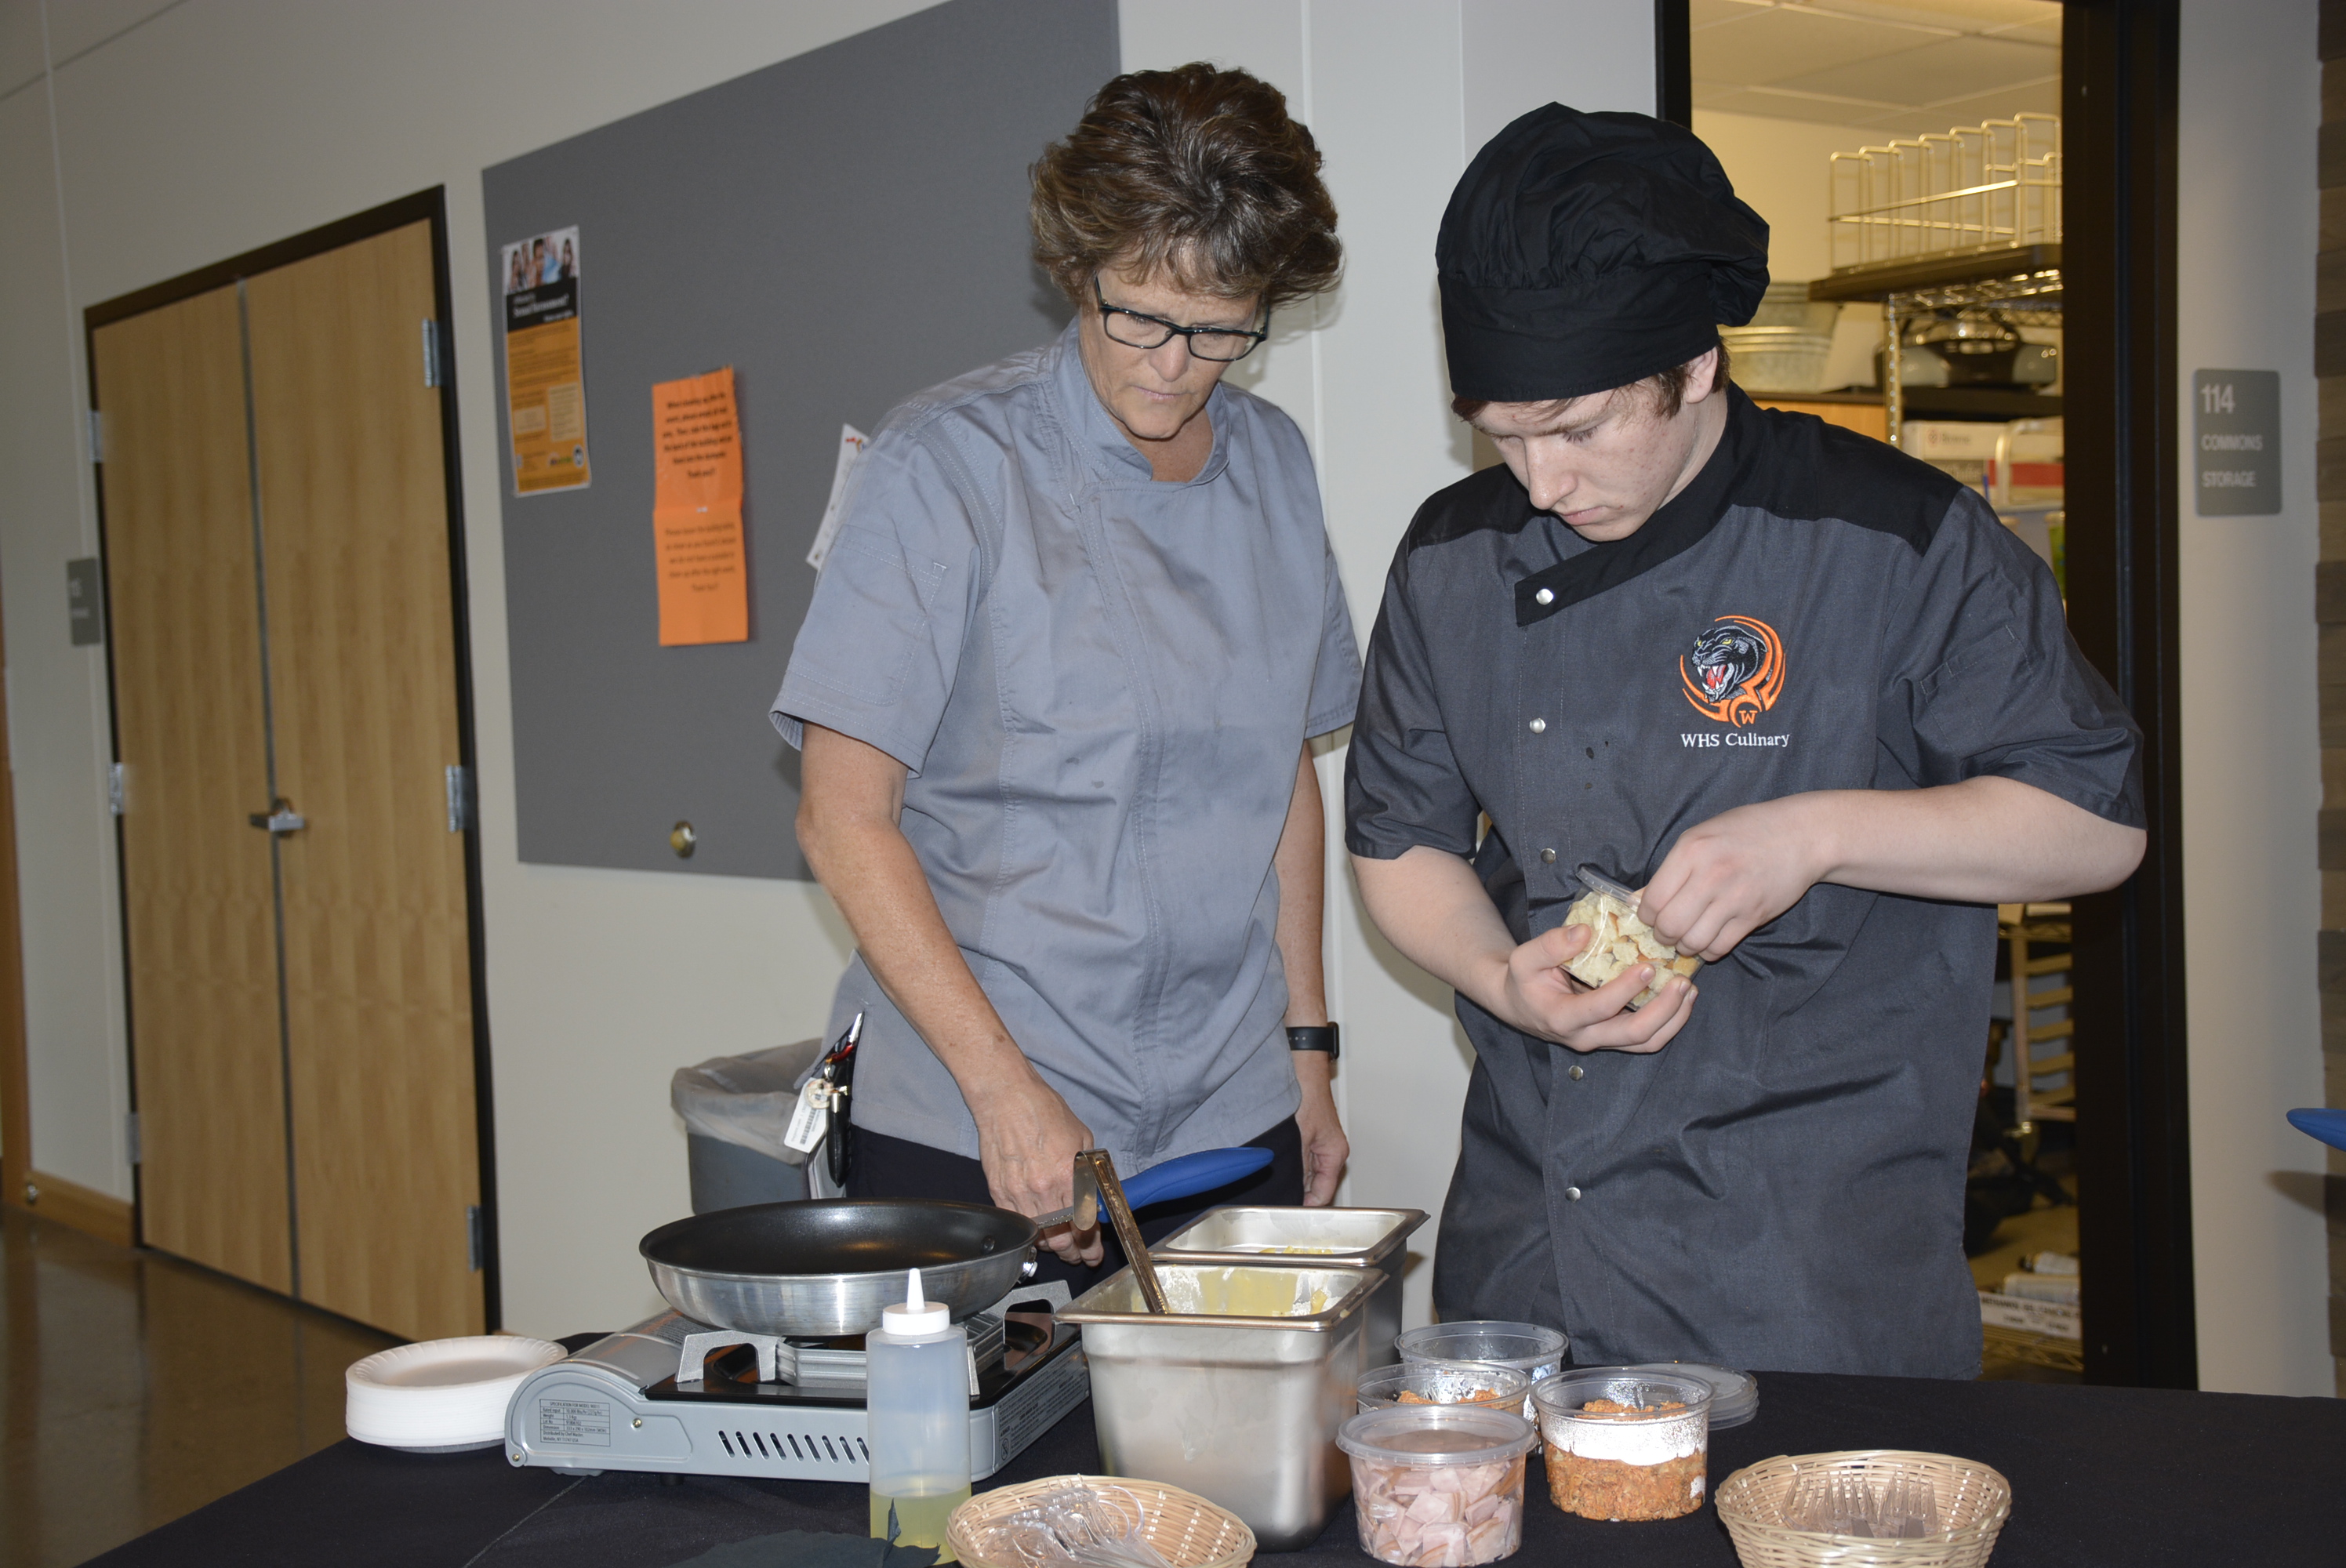 Brenda and a student in front of a table where student is preparing food as part of their culinary final